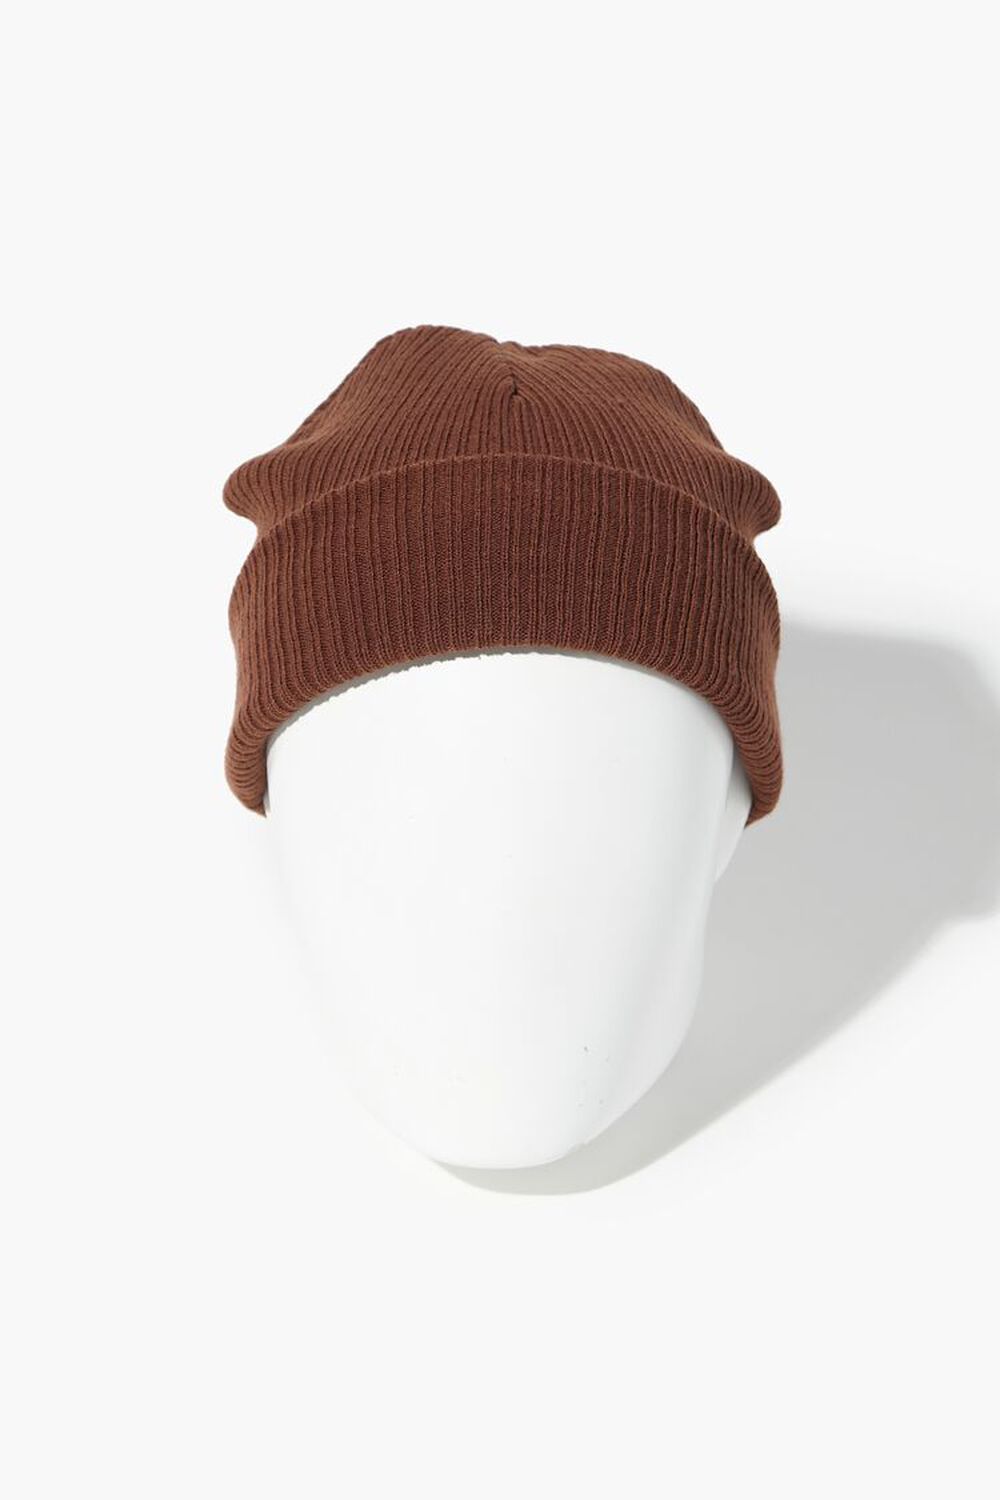 BROWN Ribbed Knit Beanie, image 1